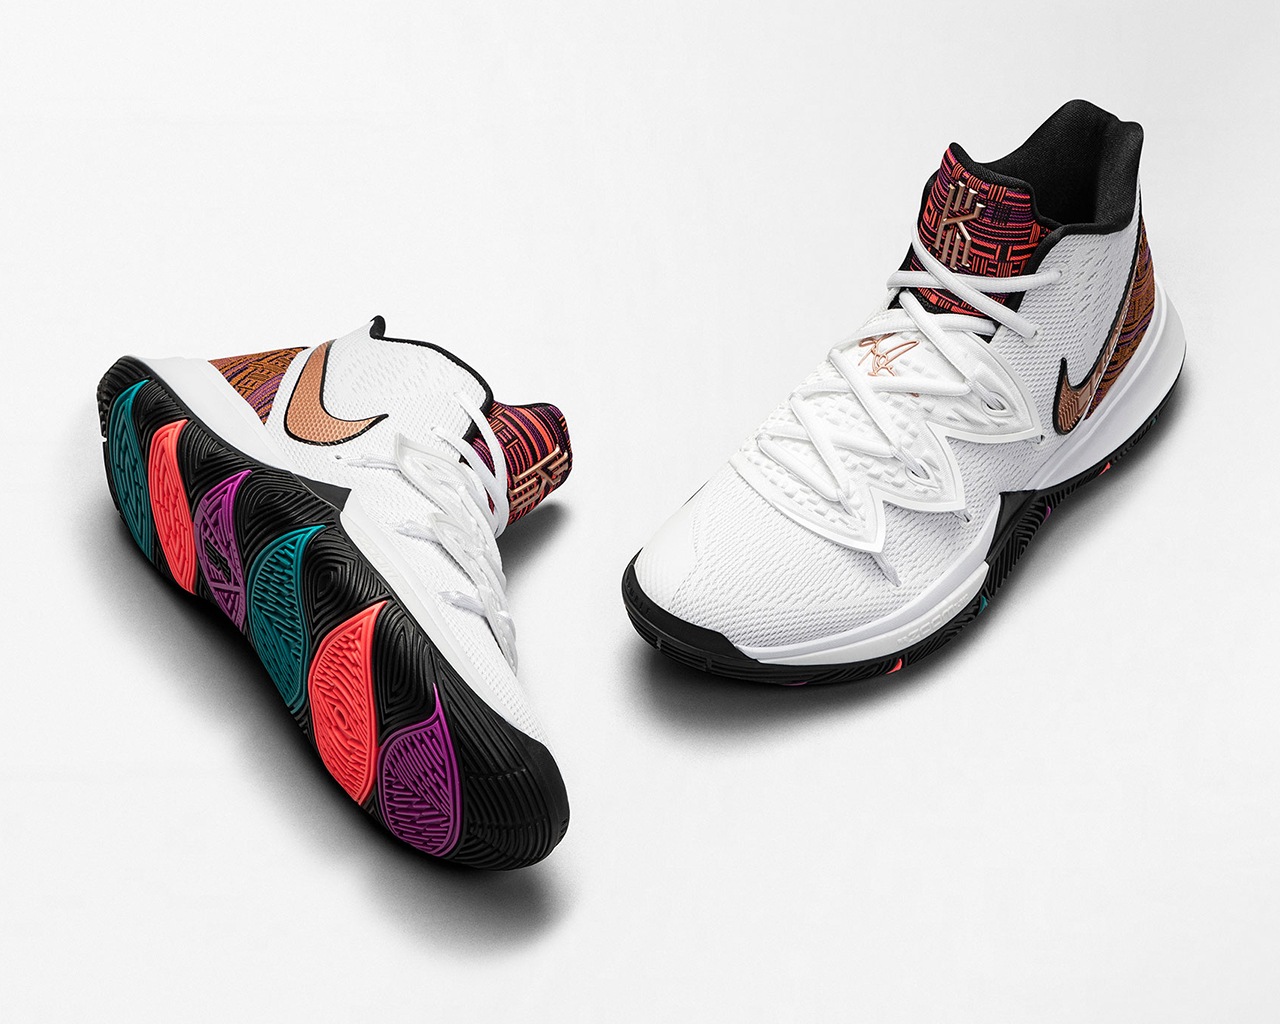 Nike Basketball Black History Month Collection 2019 Kyrie 5